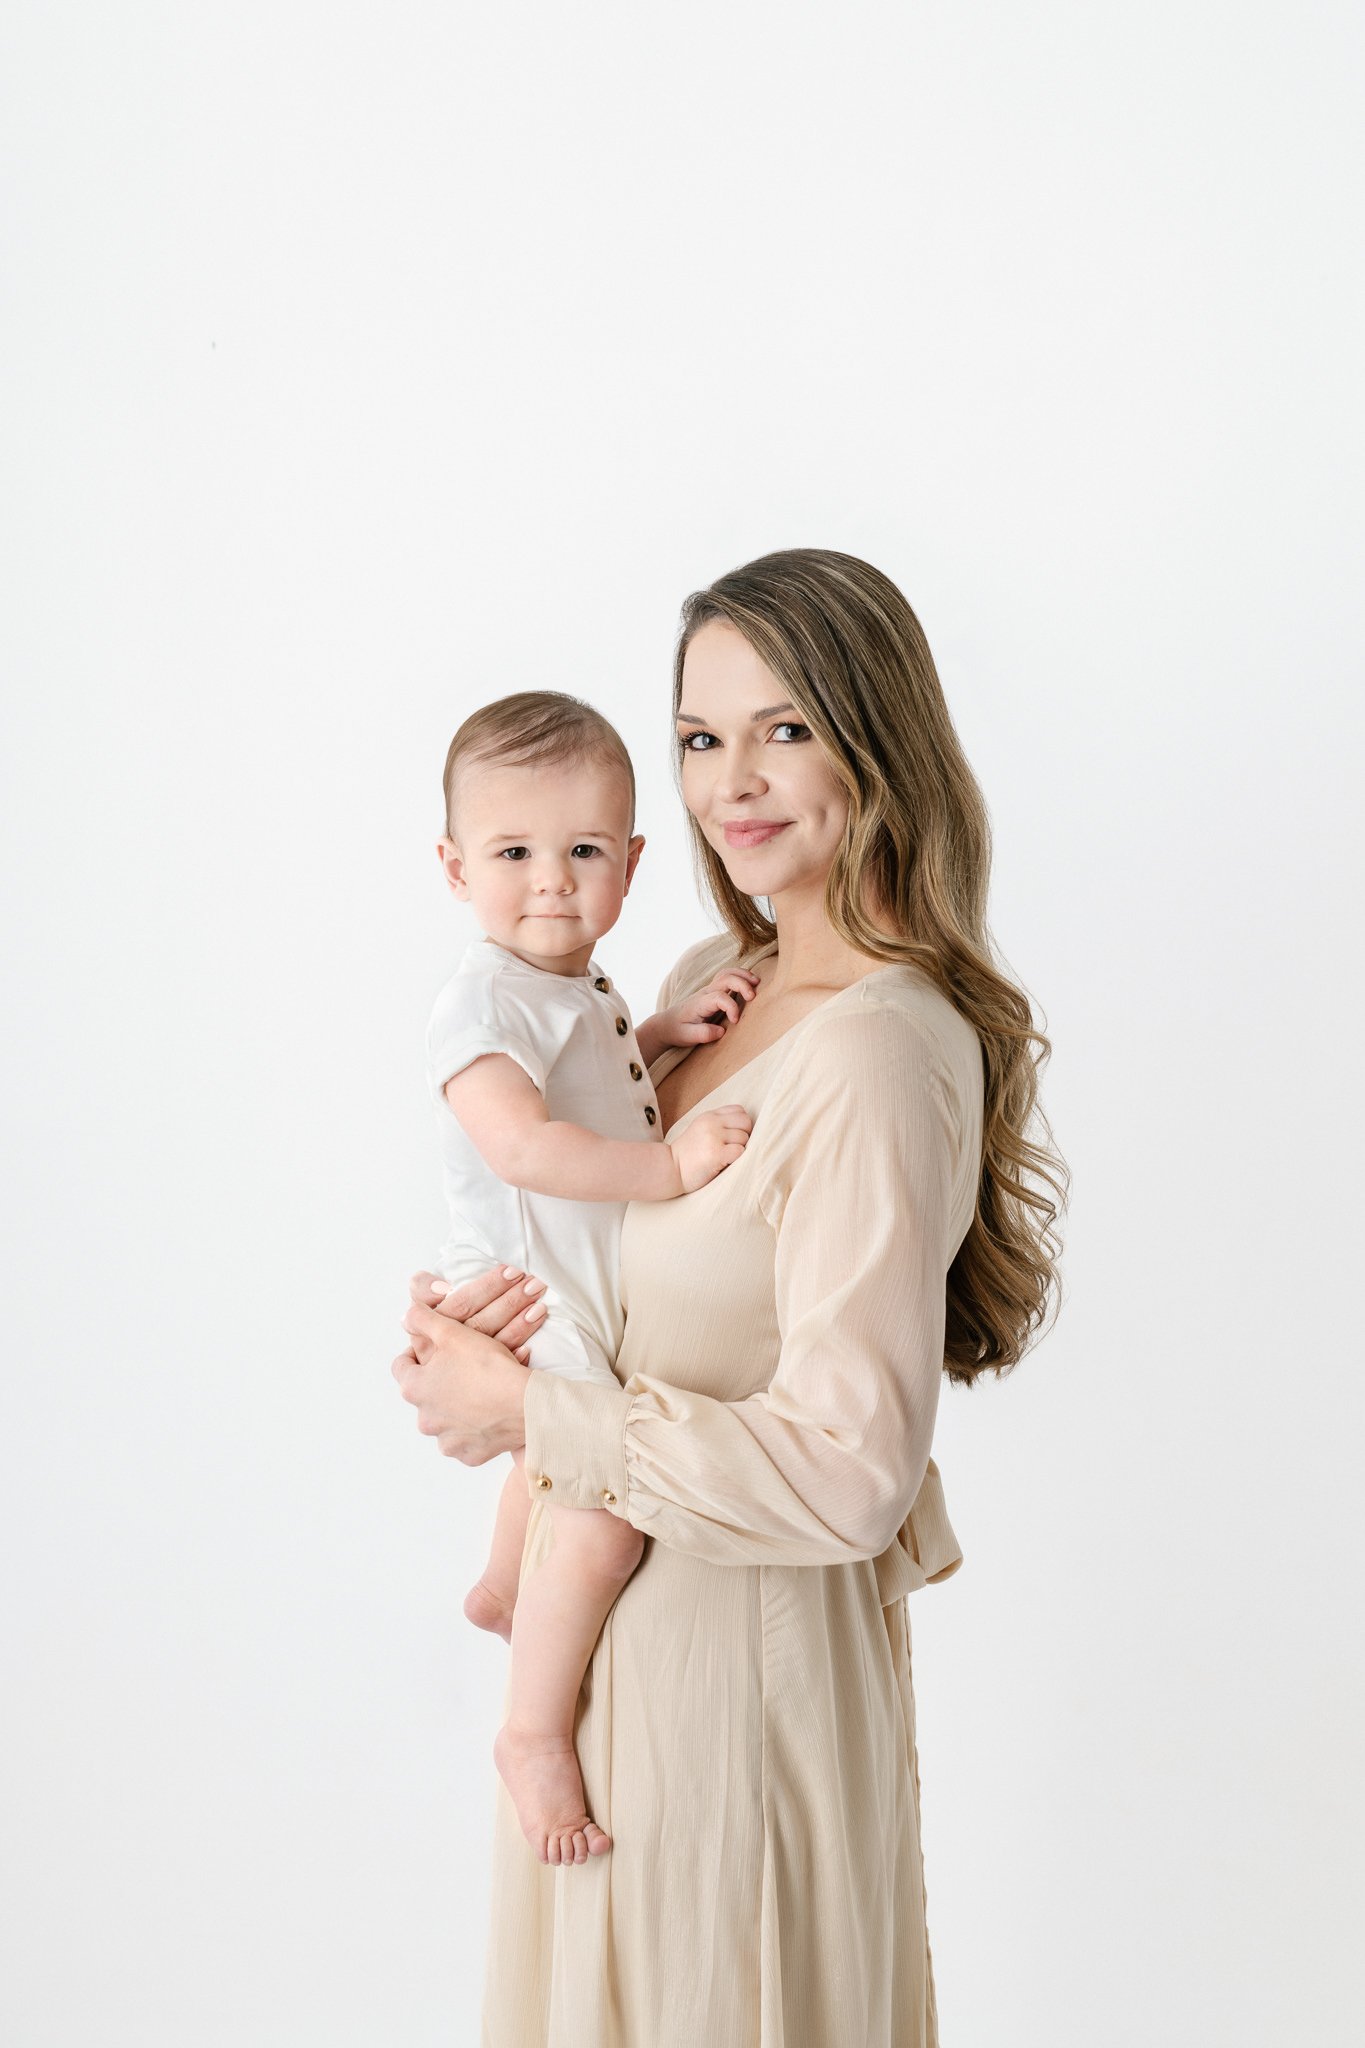  Portrait of a mother holding her baby boy in an all-white studio by Nicole Hawkins Photography. mother and baby studio portrait #NicoleHawkinsPhotography #NicoleHawkinsBabies #FirstBirthdayPhotography #StudioFamilyPortraits #NJBabies #FirstBirthday 